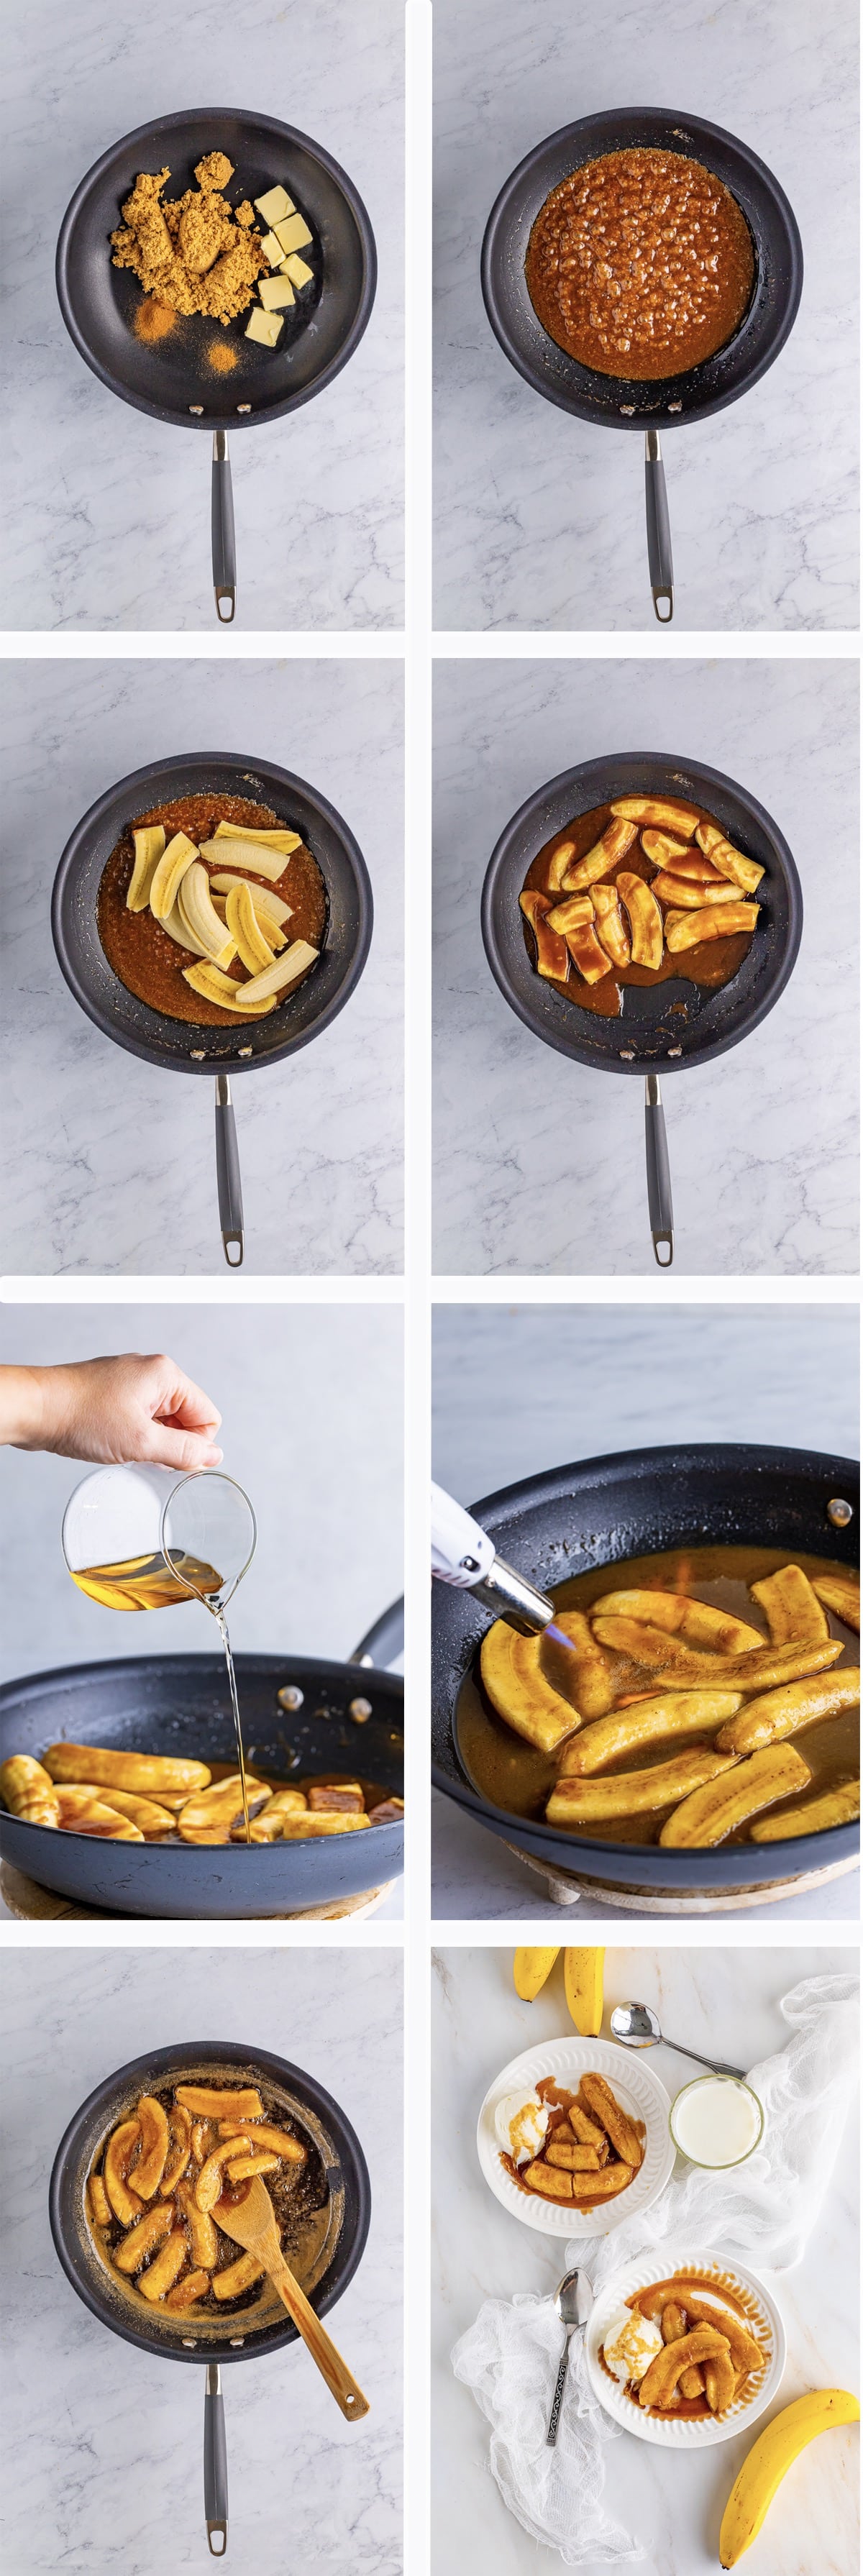 Collage of photos showing how to make New Orleans Bananas Foster on white marble countertop